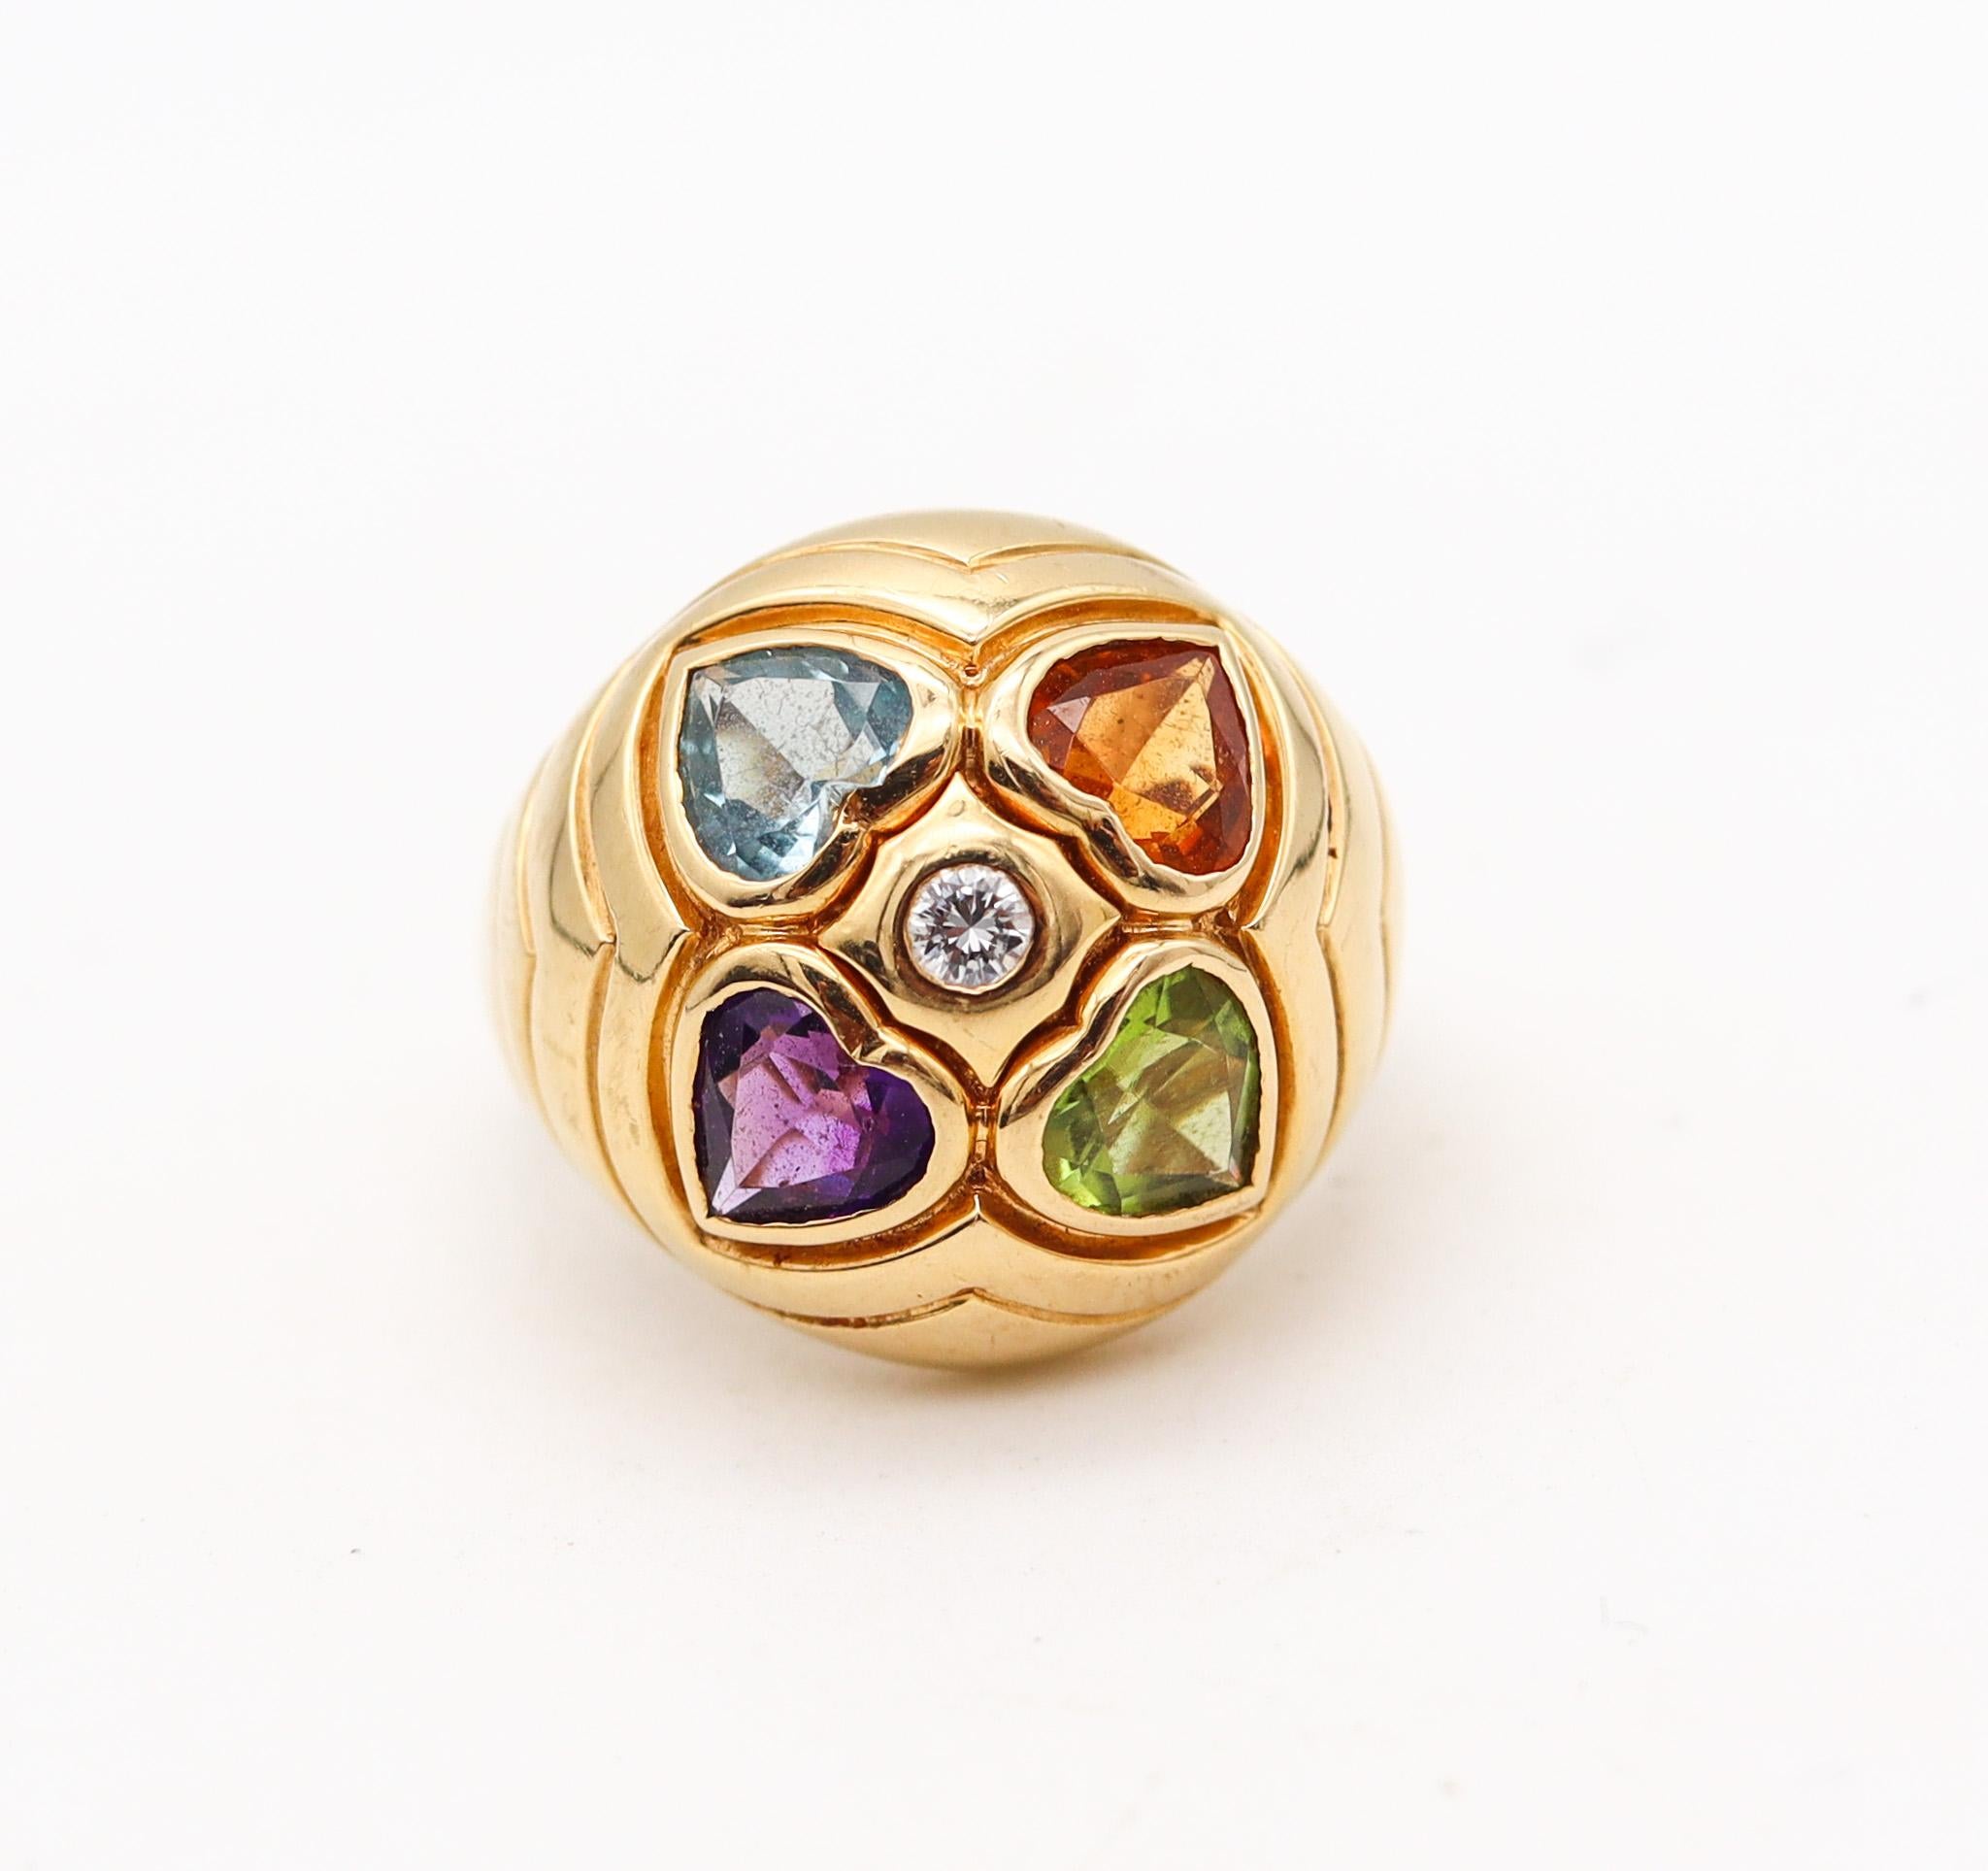 Cocktail Ring designed by Bvlgari.

Beautiful cocktail ring, created in Rome in Italy by the jewelry house of Bvlgari, back in the 1980. This vintage ring has been crafted with a bombe shape in solid yellow gold of 18 karats and finished with high